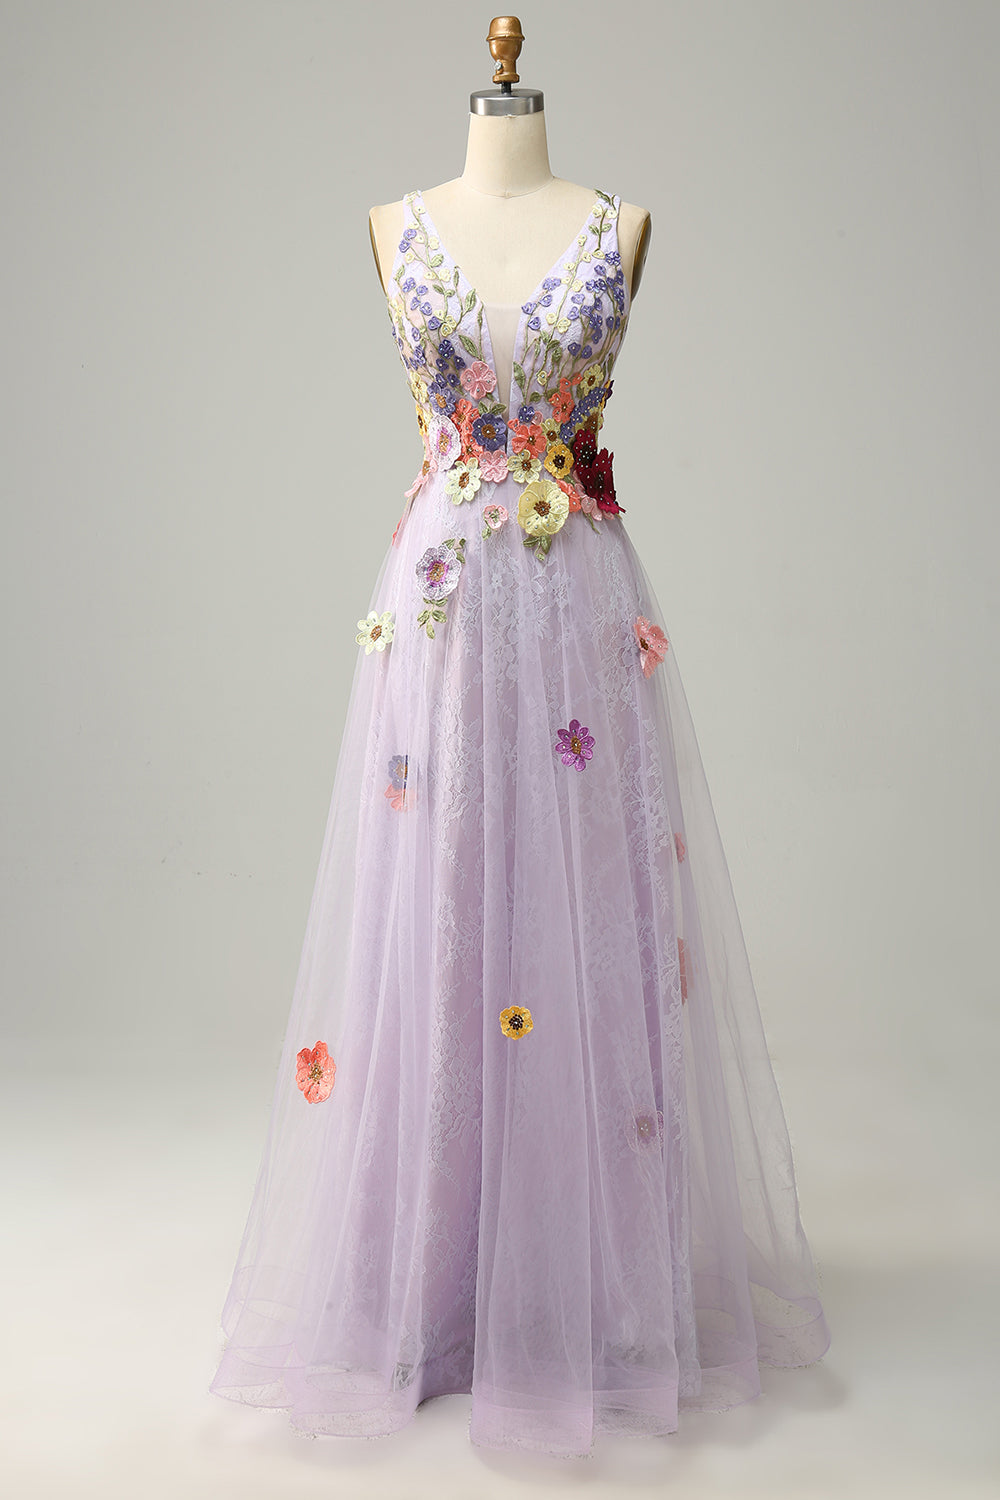 Tulle Backless Lavender Long Formal Dress with Embroidery